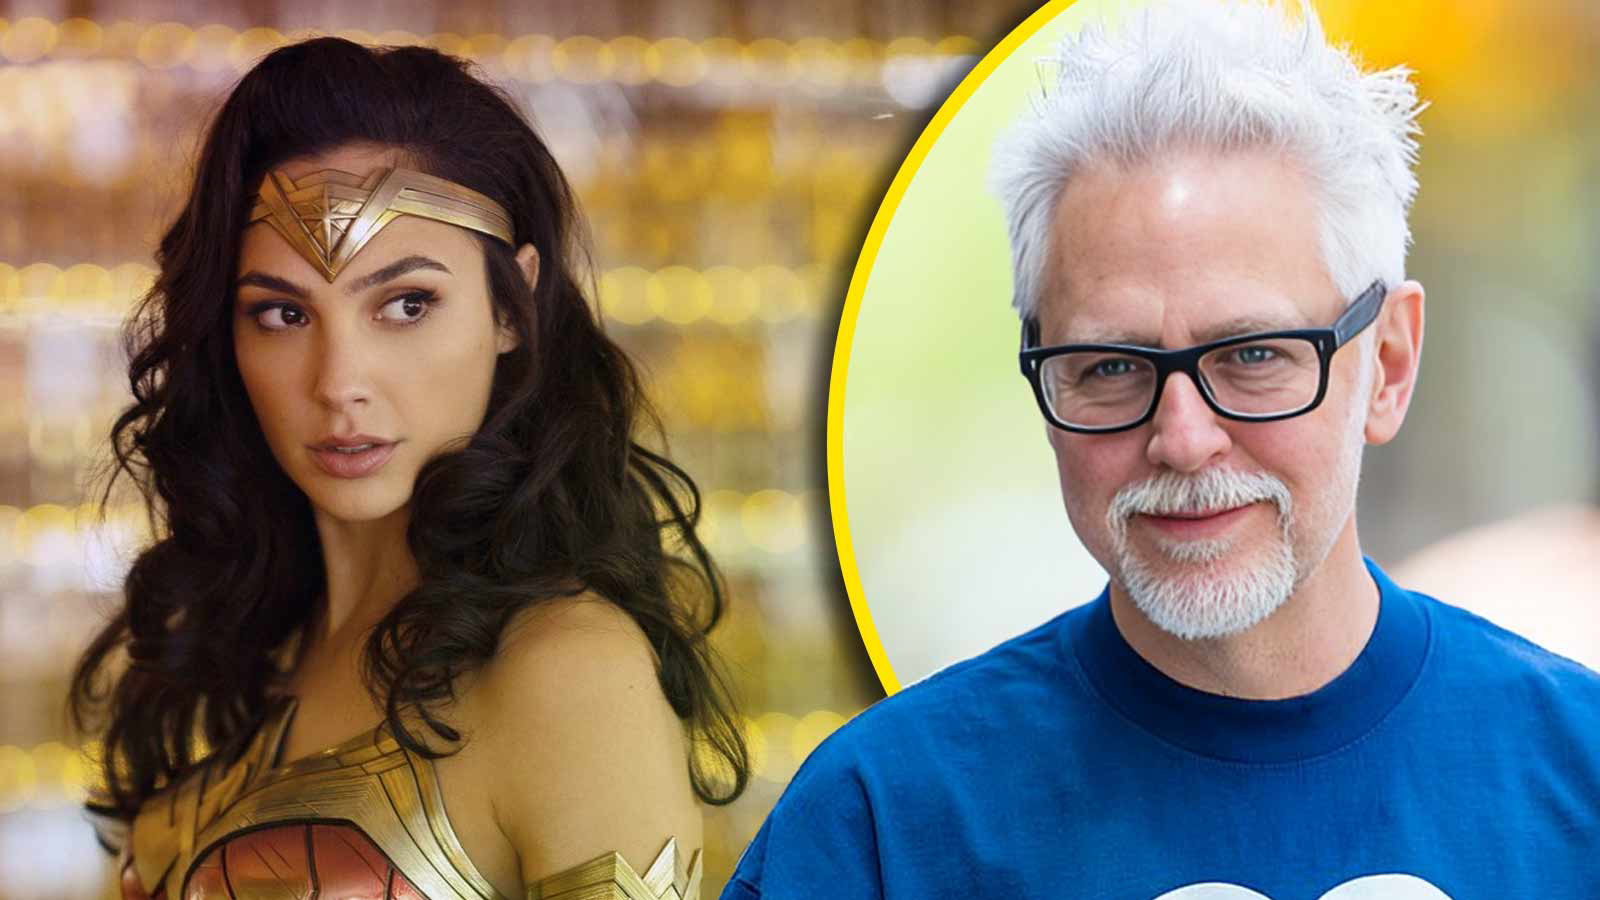 “Nothing is “in production” unless it’s been greenlit”: James Gunn Drops Huge Update on Wonder Woman Prequel Series ‘Paradise Lost’ That’ll Make up For a DCEU Snub